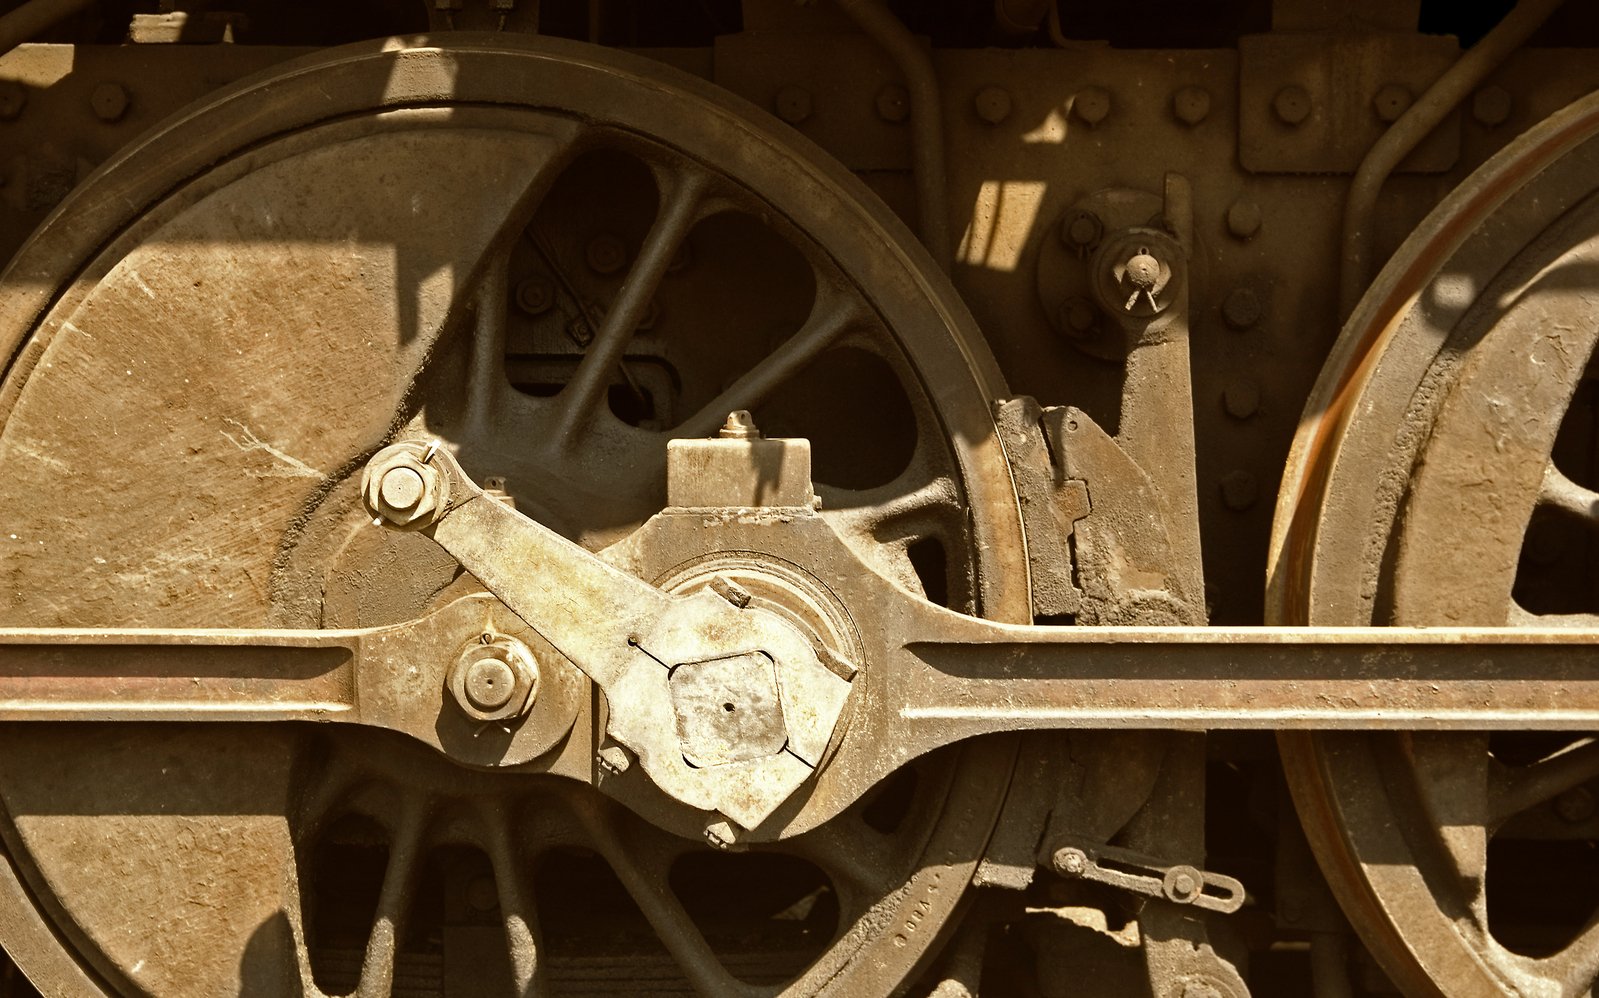 the rear wheels and front wheel on a train